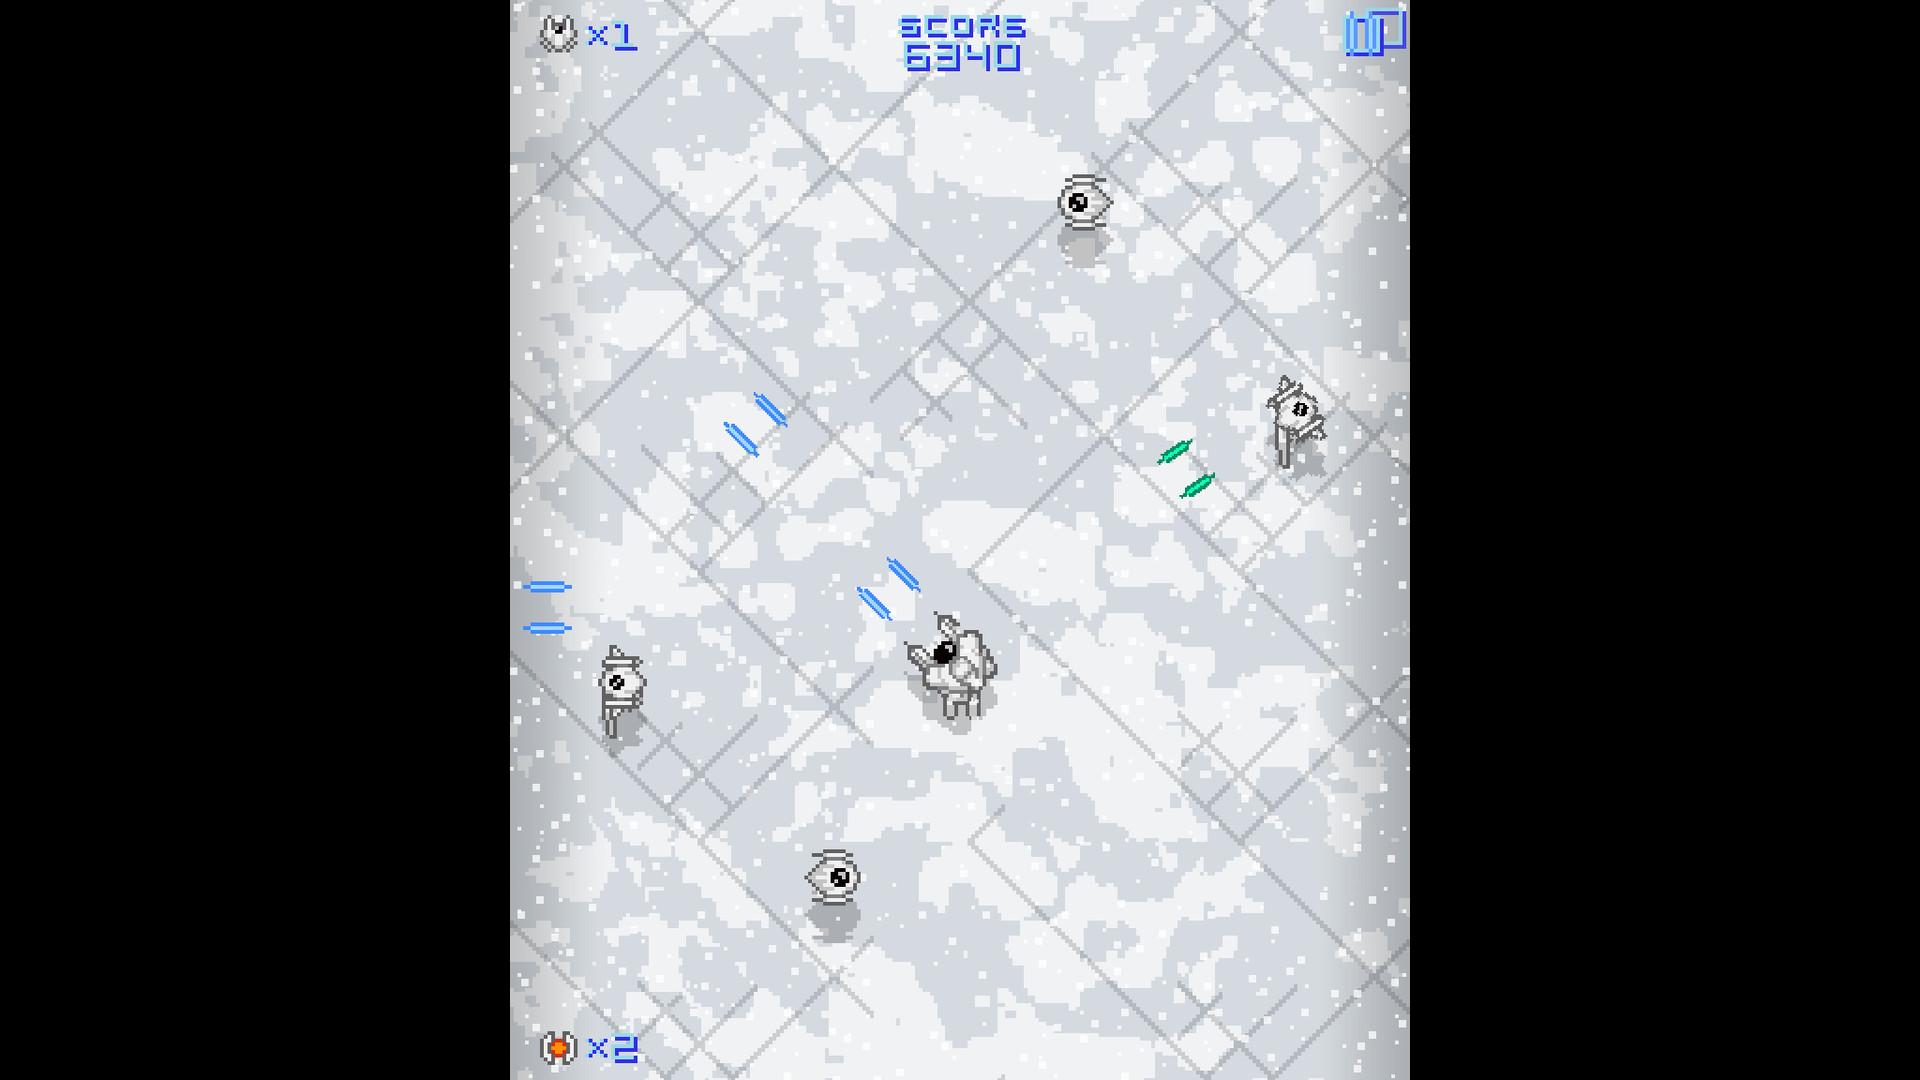 Screenshot №9 from game Mobile Astro